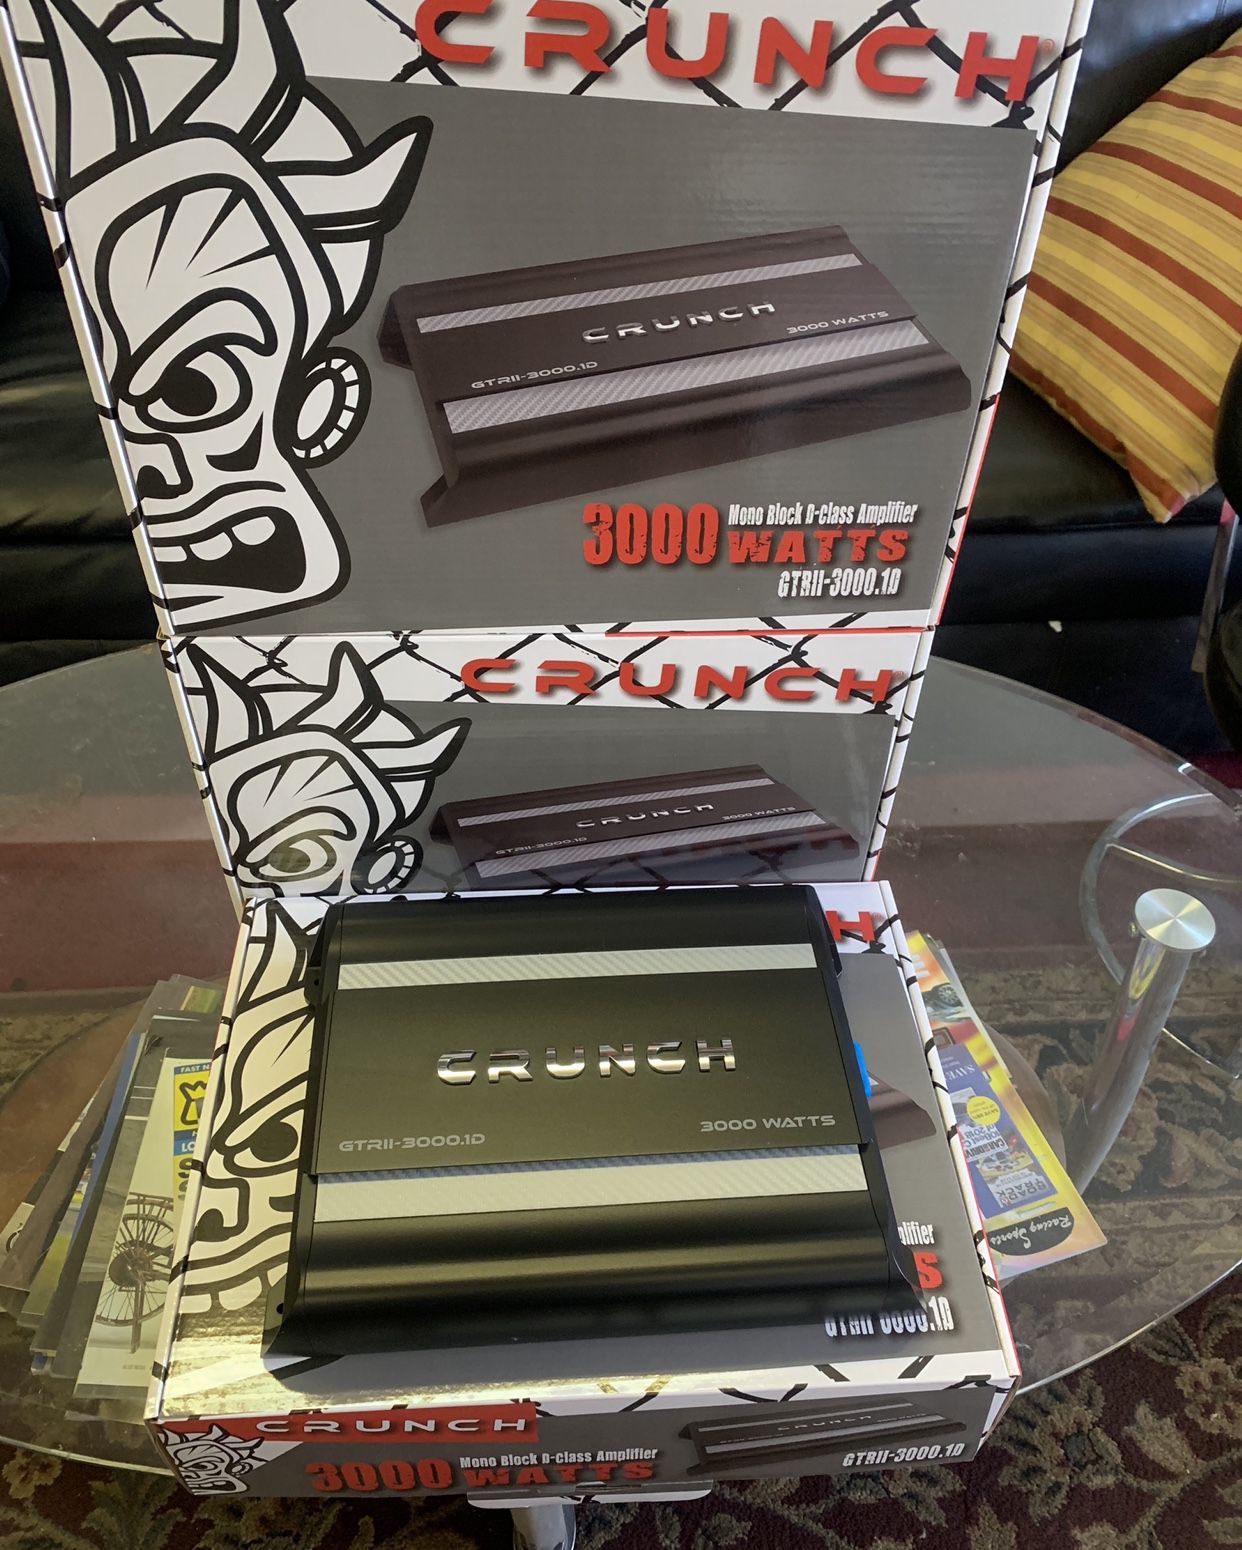 Crunch Car Audio . Car Stereo Amplifier . 3000 watts Class D With Remote Bass Knob . New Years Sure Sale $99 While They Last . New